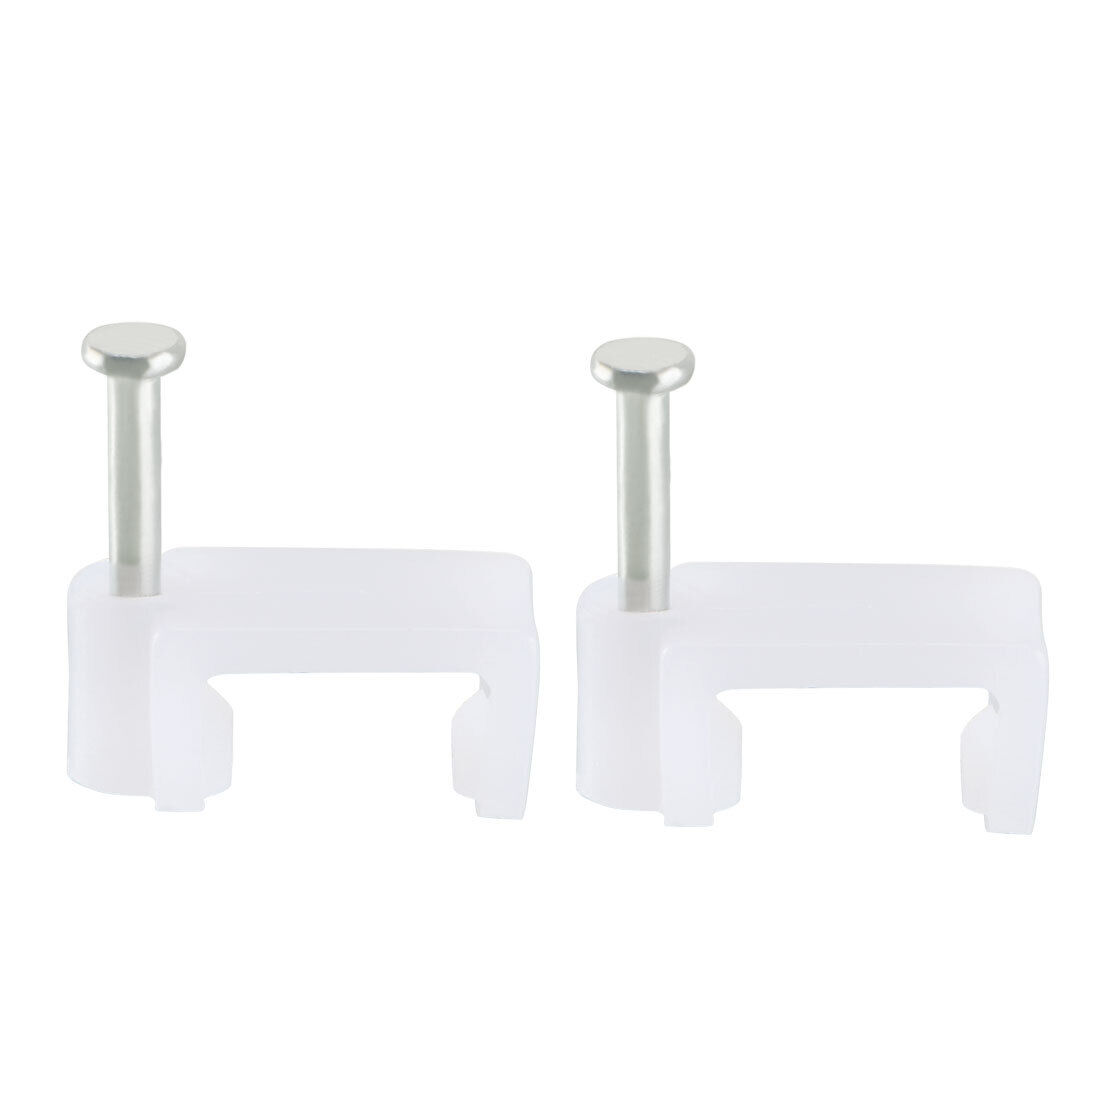 200pcs Flat Cable Clip Nail Coaxial Tacks Wire Clips 12mm White